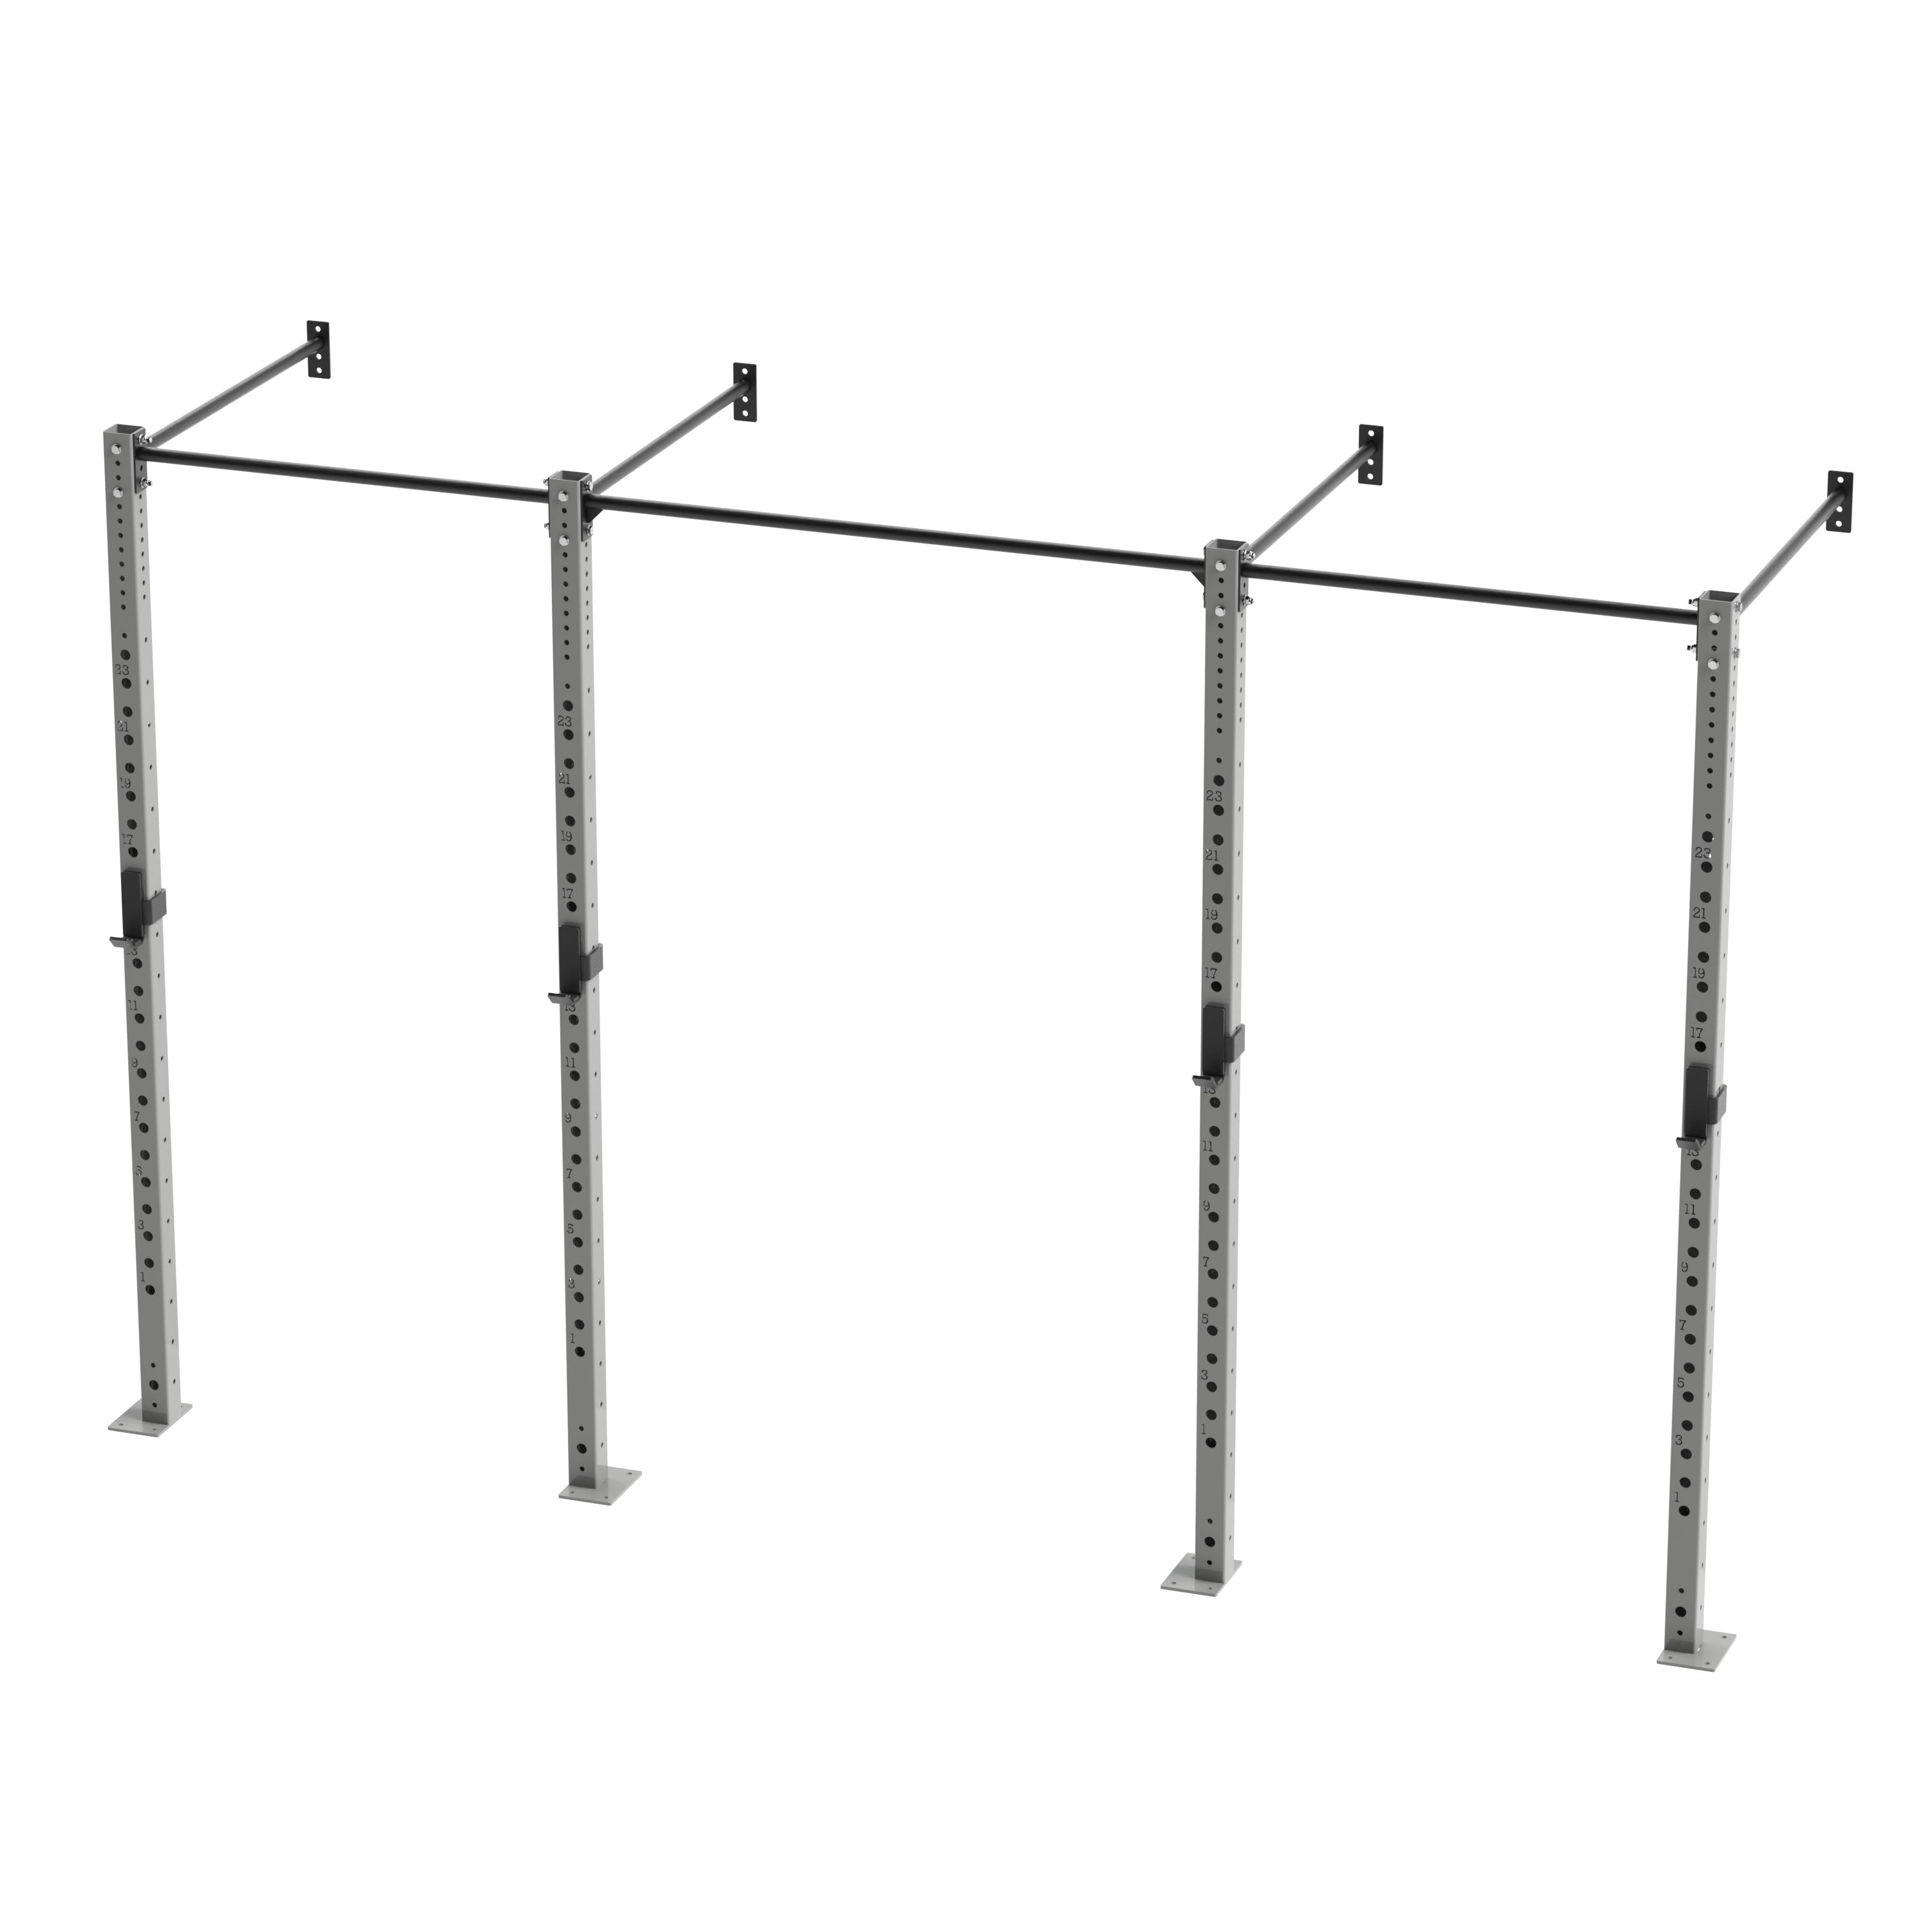 Bison Series - 2 Bay Wall Mounted Rig - Wolverson Fitness